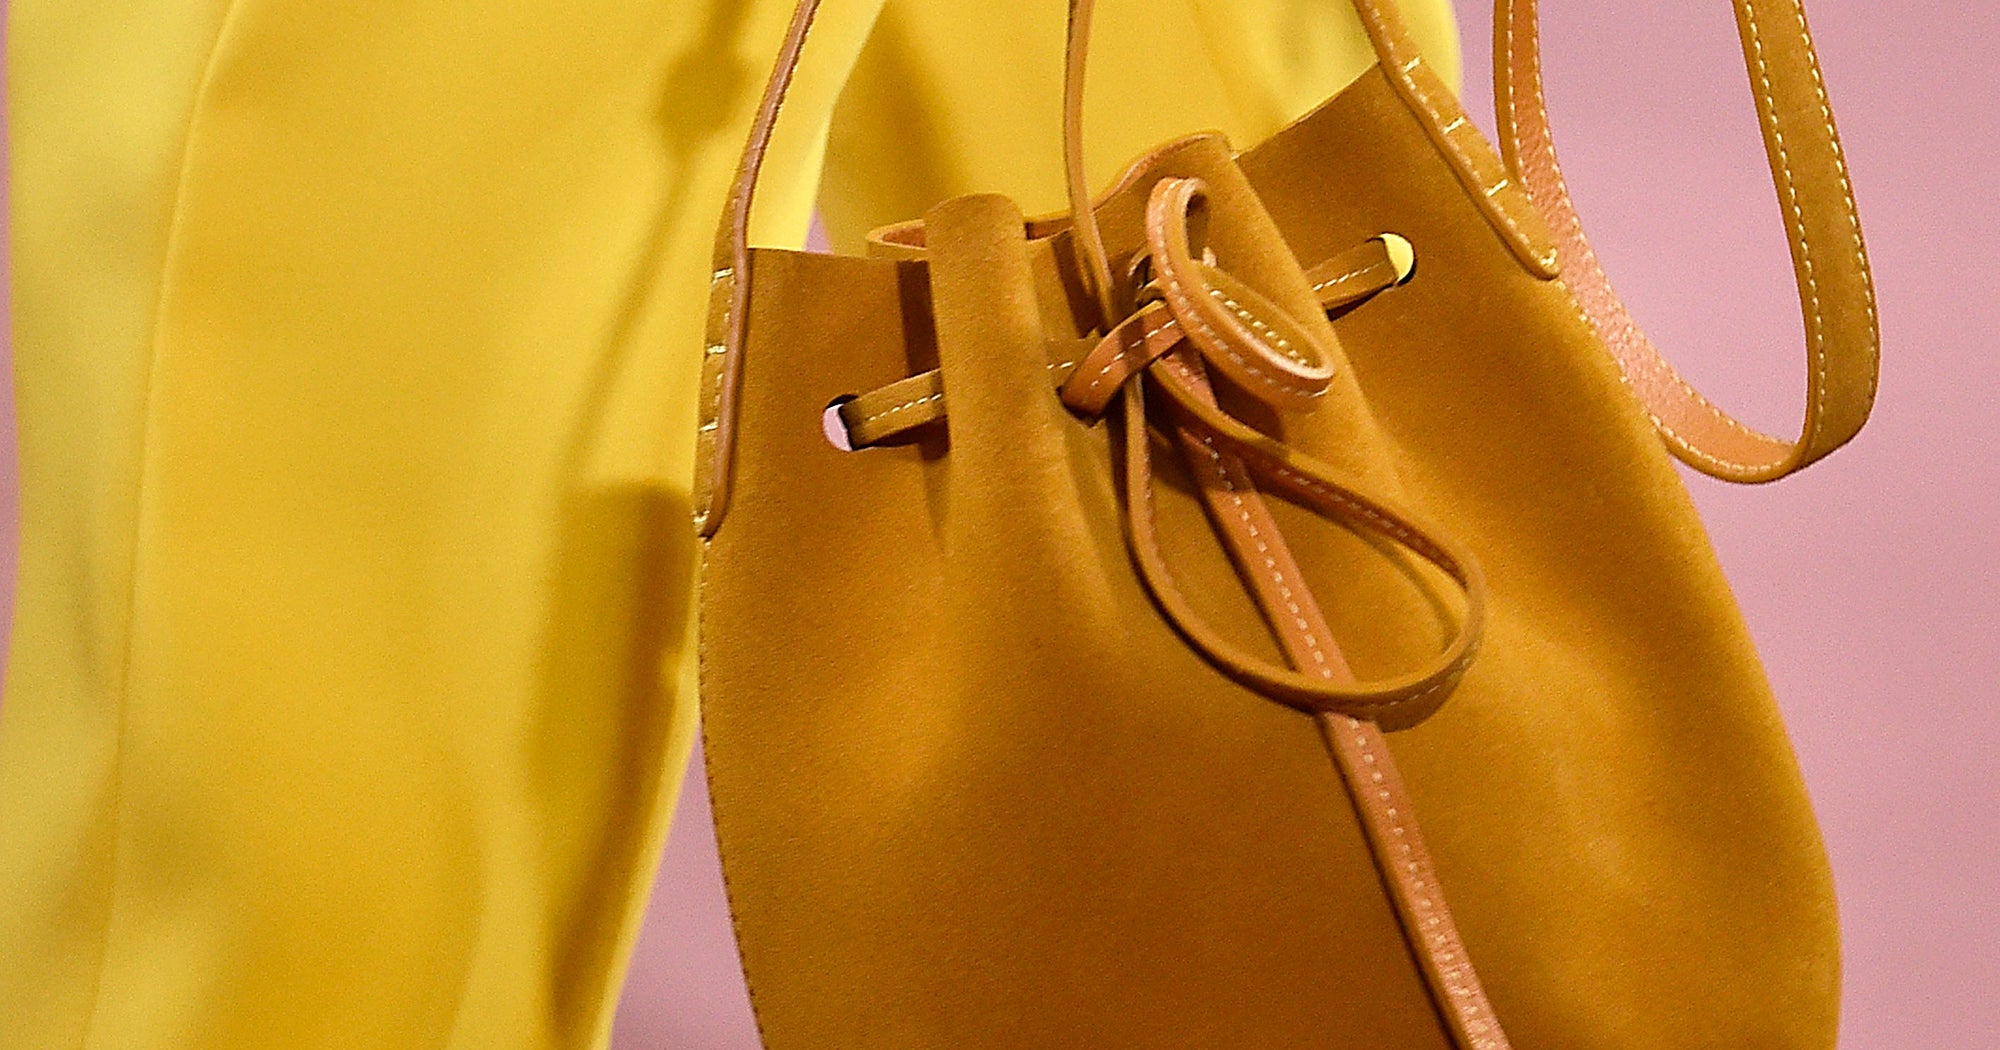 How Mansur Gavriel Made The Most Famous Bucket Bag Of The Last Decade